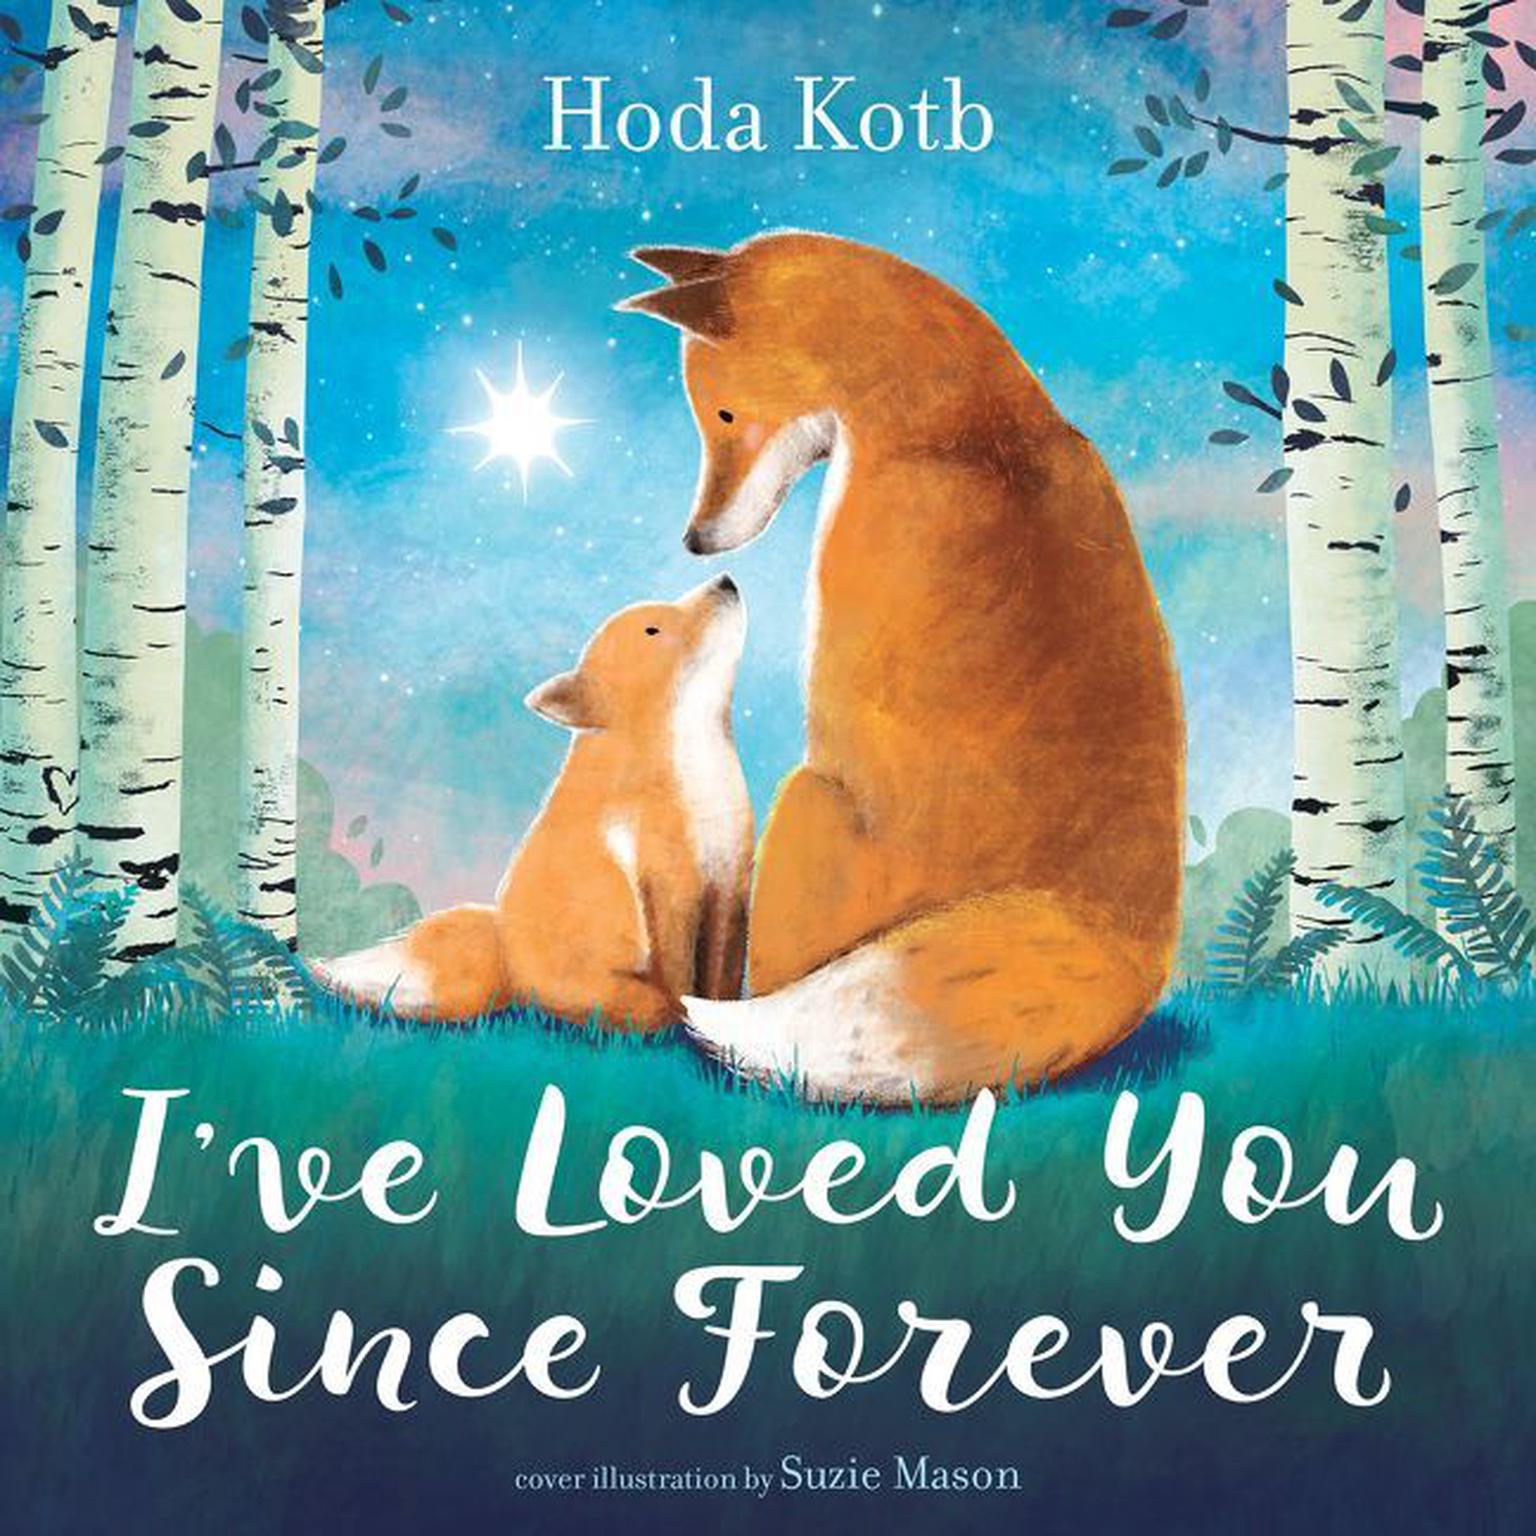 Ive Loved You Since Forever Audiobook, by Hoda Kotb